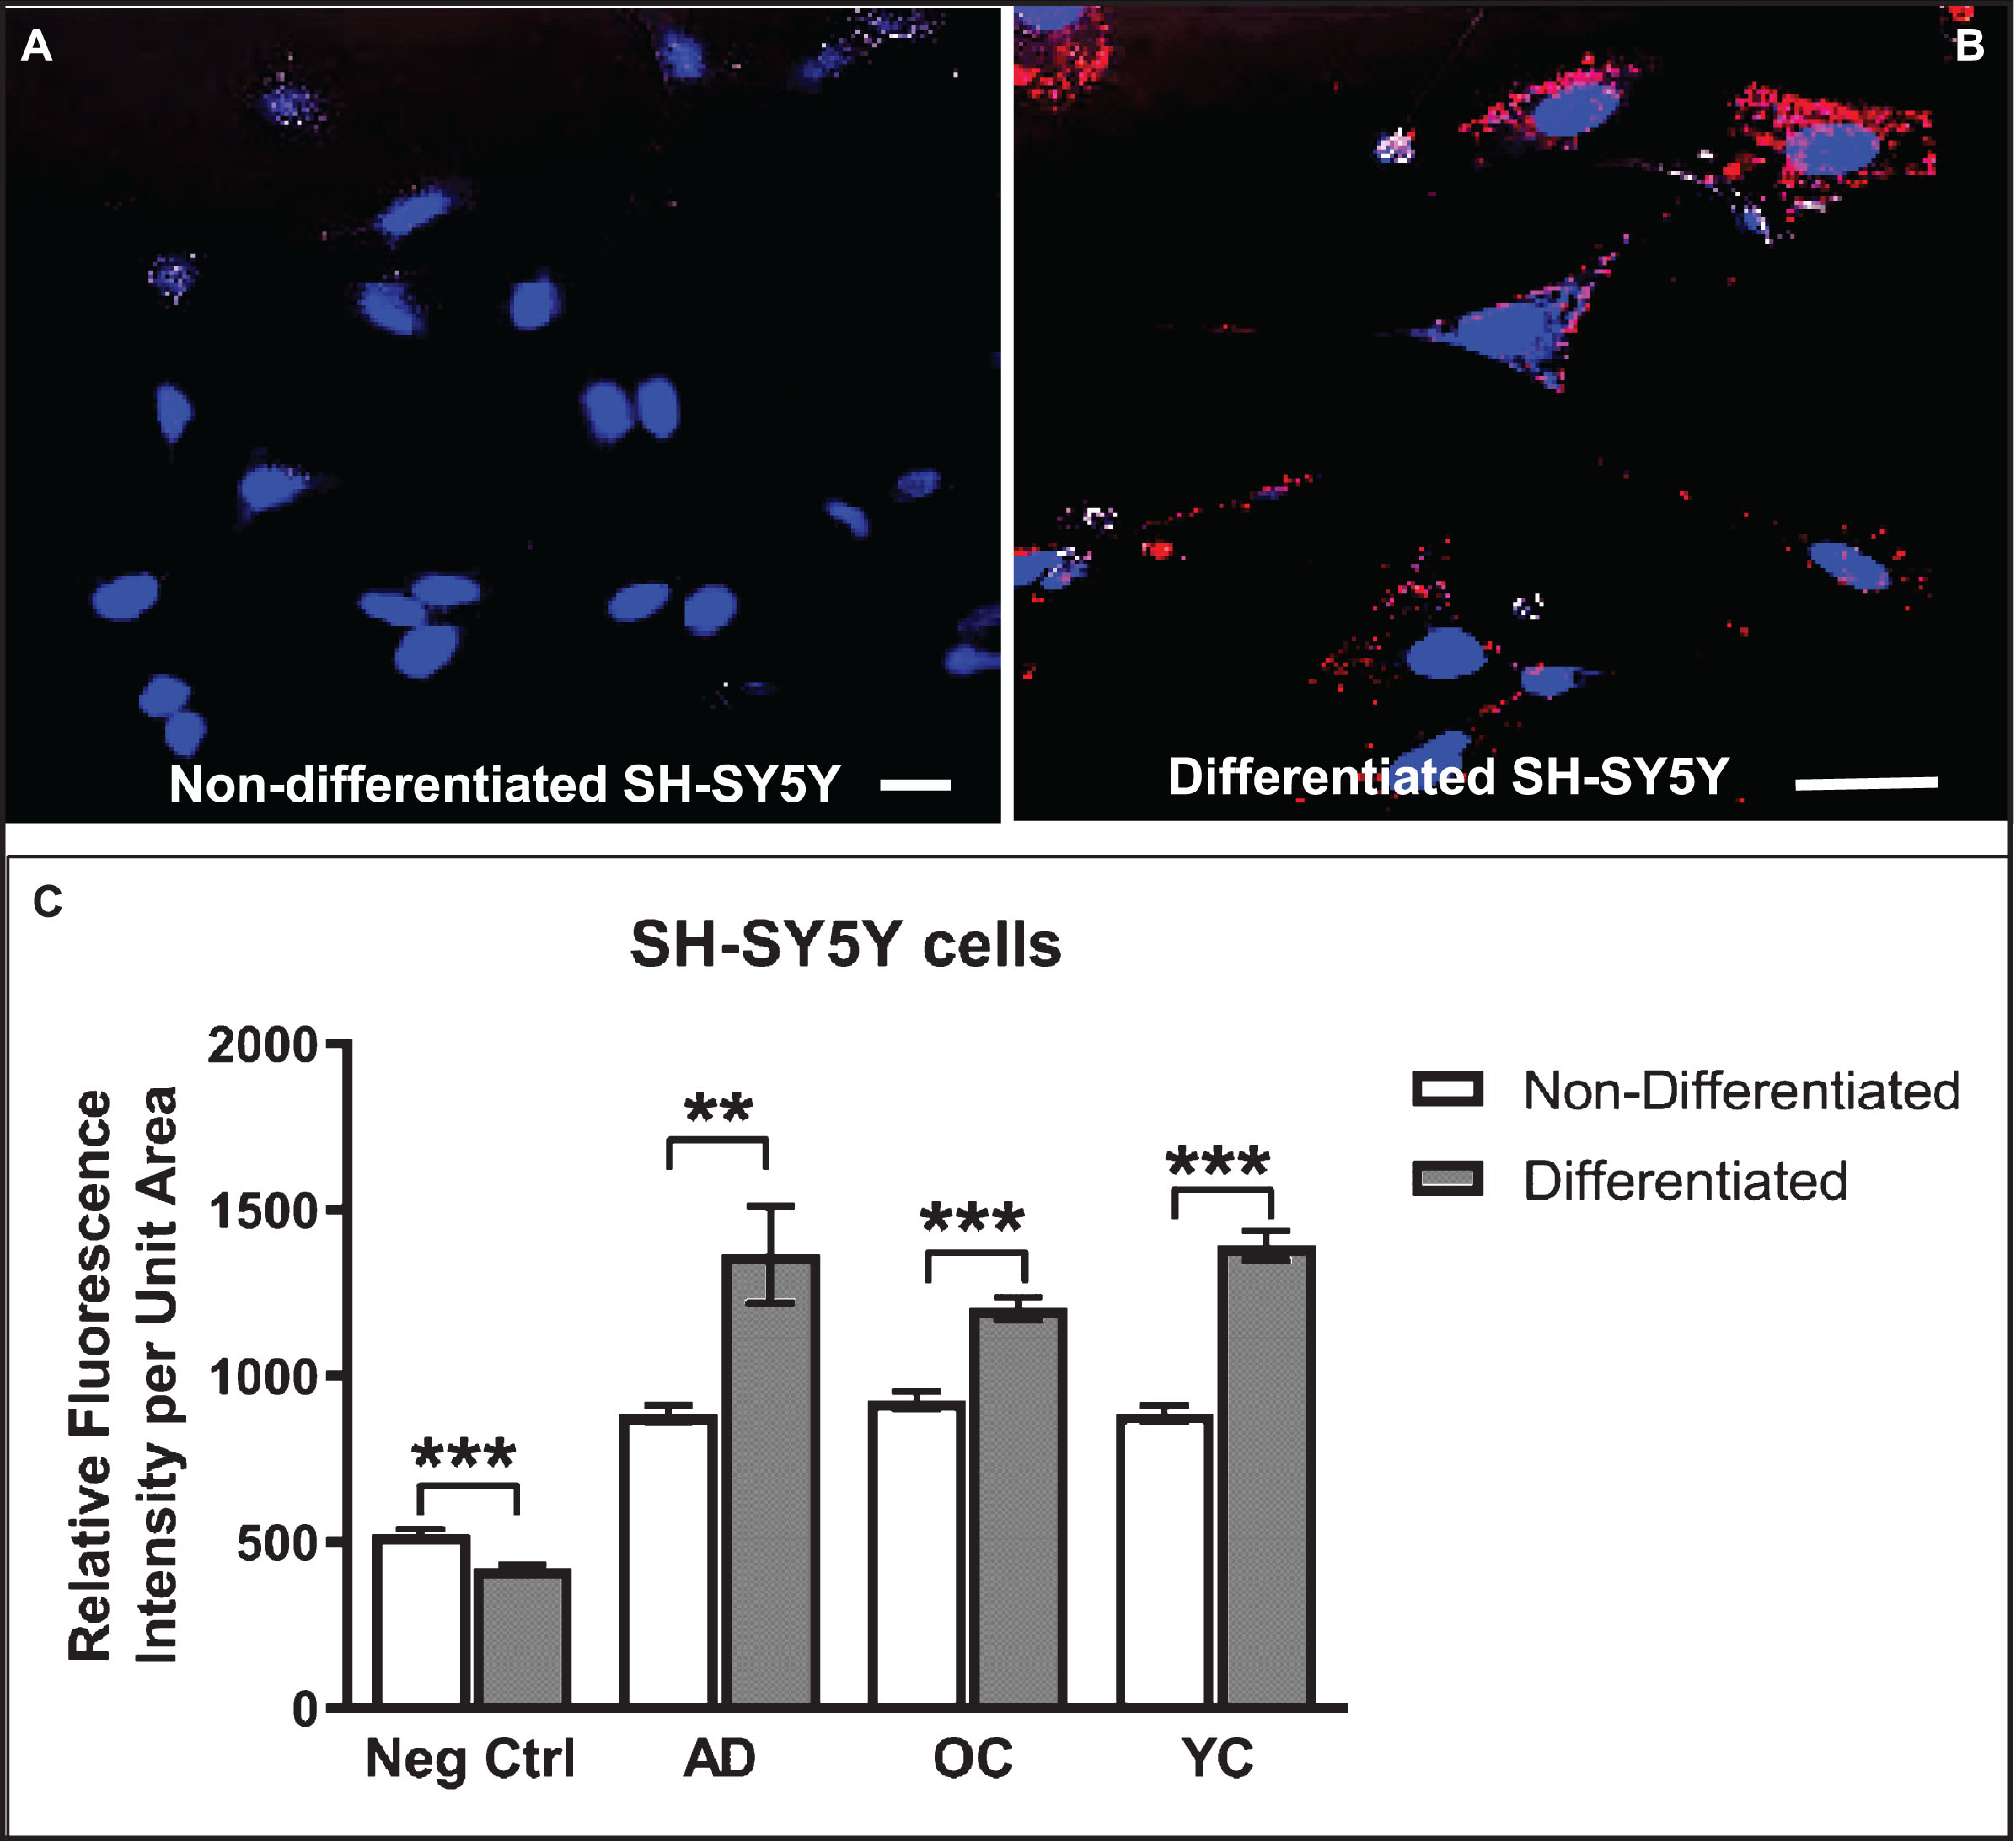 Differentiated SH-SY5Y cells show increased reactivity to IgG autoantibodies present in human serum. A, B) Confocal images of non-differentiated (A) and differentiated (B) SH-SY5Y cells treated with human serum (diluted 1:50) in medium for 24 h and then immunostained with Cy3-labeled (red) anti-human IgG antibodies and counterstained with Hoechst stain (blue) to highlight nuclei. C) Differentiated cells show increased binding of serum IgG over that of non-differentiated cells. Unexpectedly, the extent of IgG binding in cells treated with serum from an AD patient did not differ significantly from an older non-demented subject or younger control. Controls (Ctrl) were performed with omission of serum and addition of secondary antibody. Scale bar = 10 μm. ***p < 0.001. AD, Alzheimer’s disease serum; OC, old-aged matched, non-demented control; YC, younger, non-demented control.